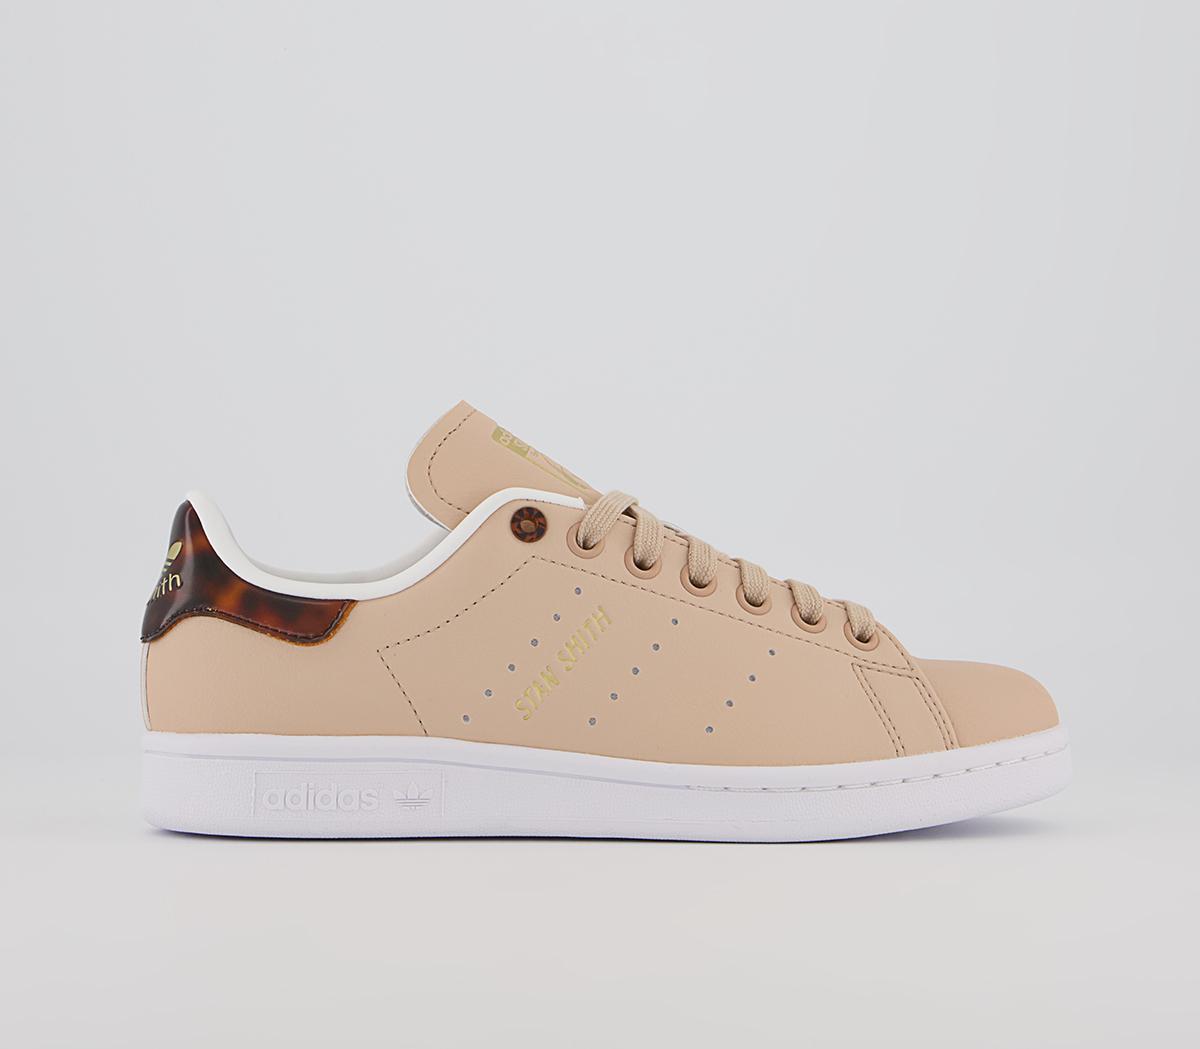 adidasStan Smith TrainersPale Nude Matte Gold Crystal White